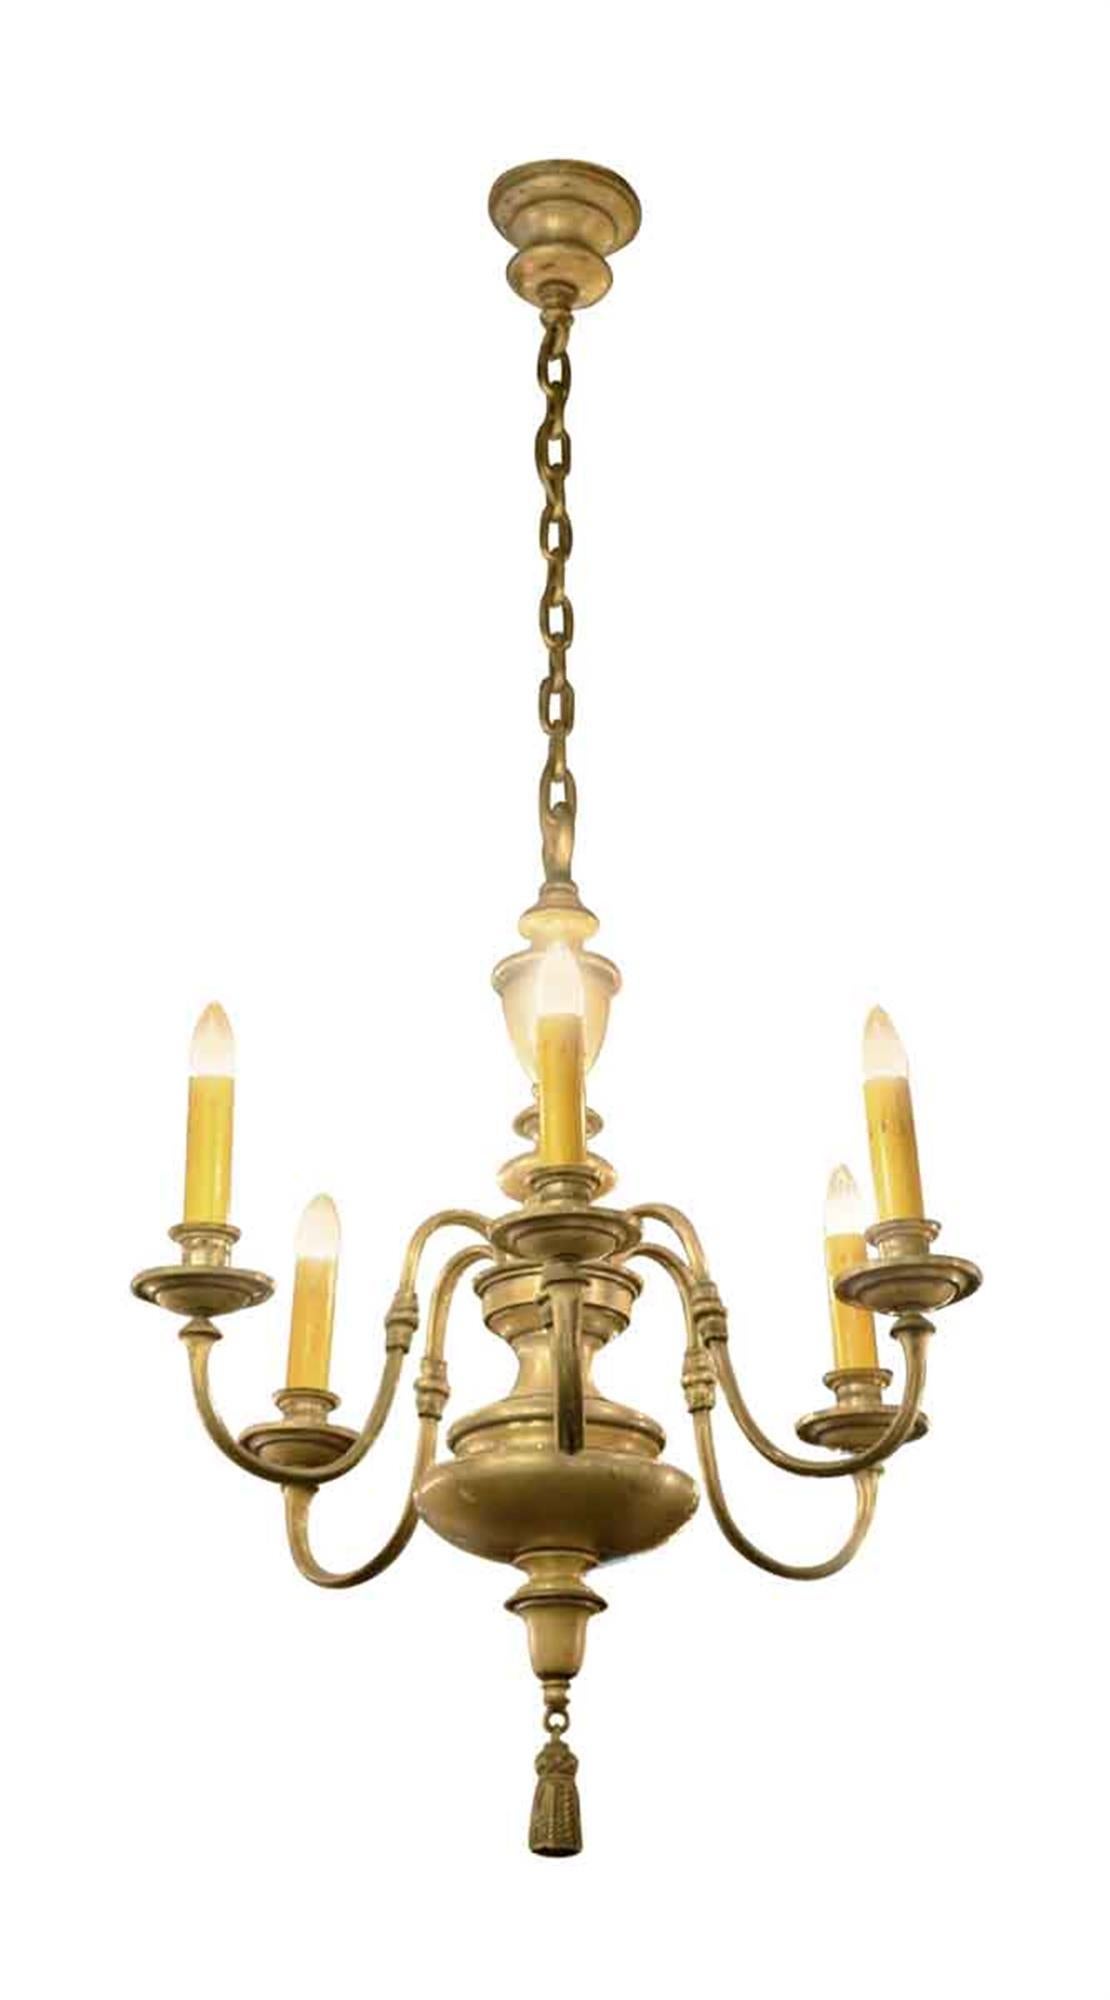 1920s bronze six arm chandelier with a nickel finish. Cleaned and rewired. Two available at time of posting. Priced each. Small quantity available at time of posting. Please inquire. Priced each. Please note, this item is located in one of our NYC